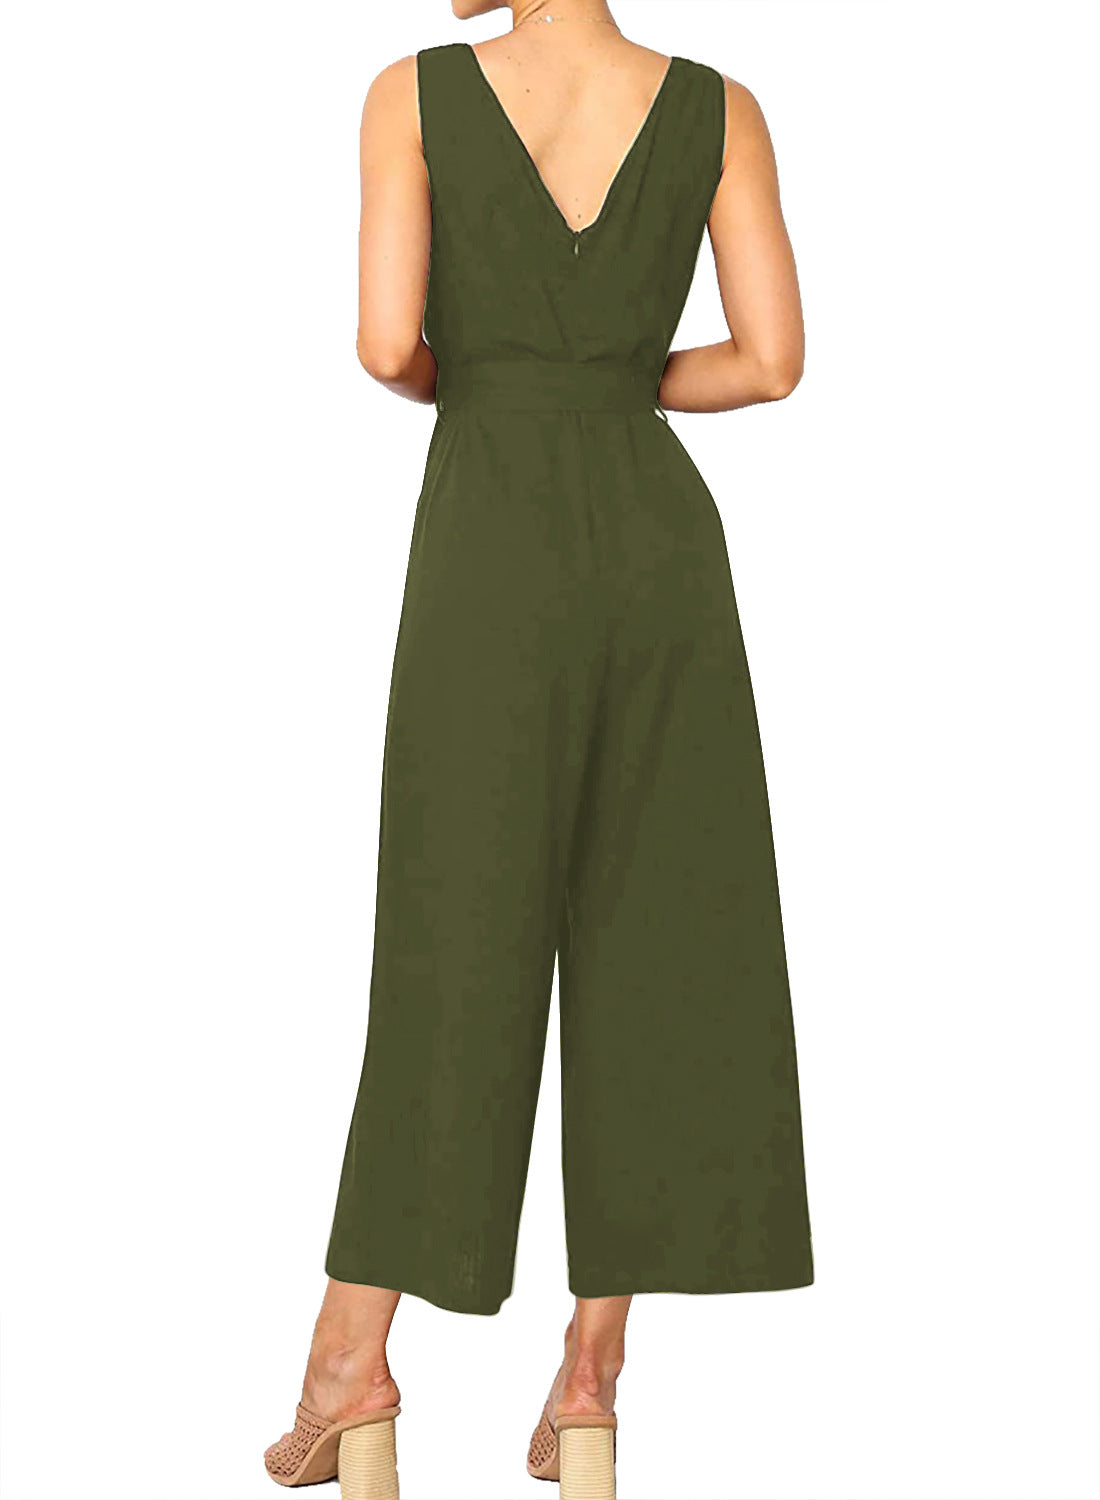 Sexy Cuasual Women Jumpsuits with Belt--Free Shipping at meselling99